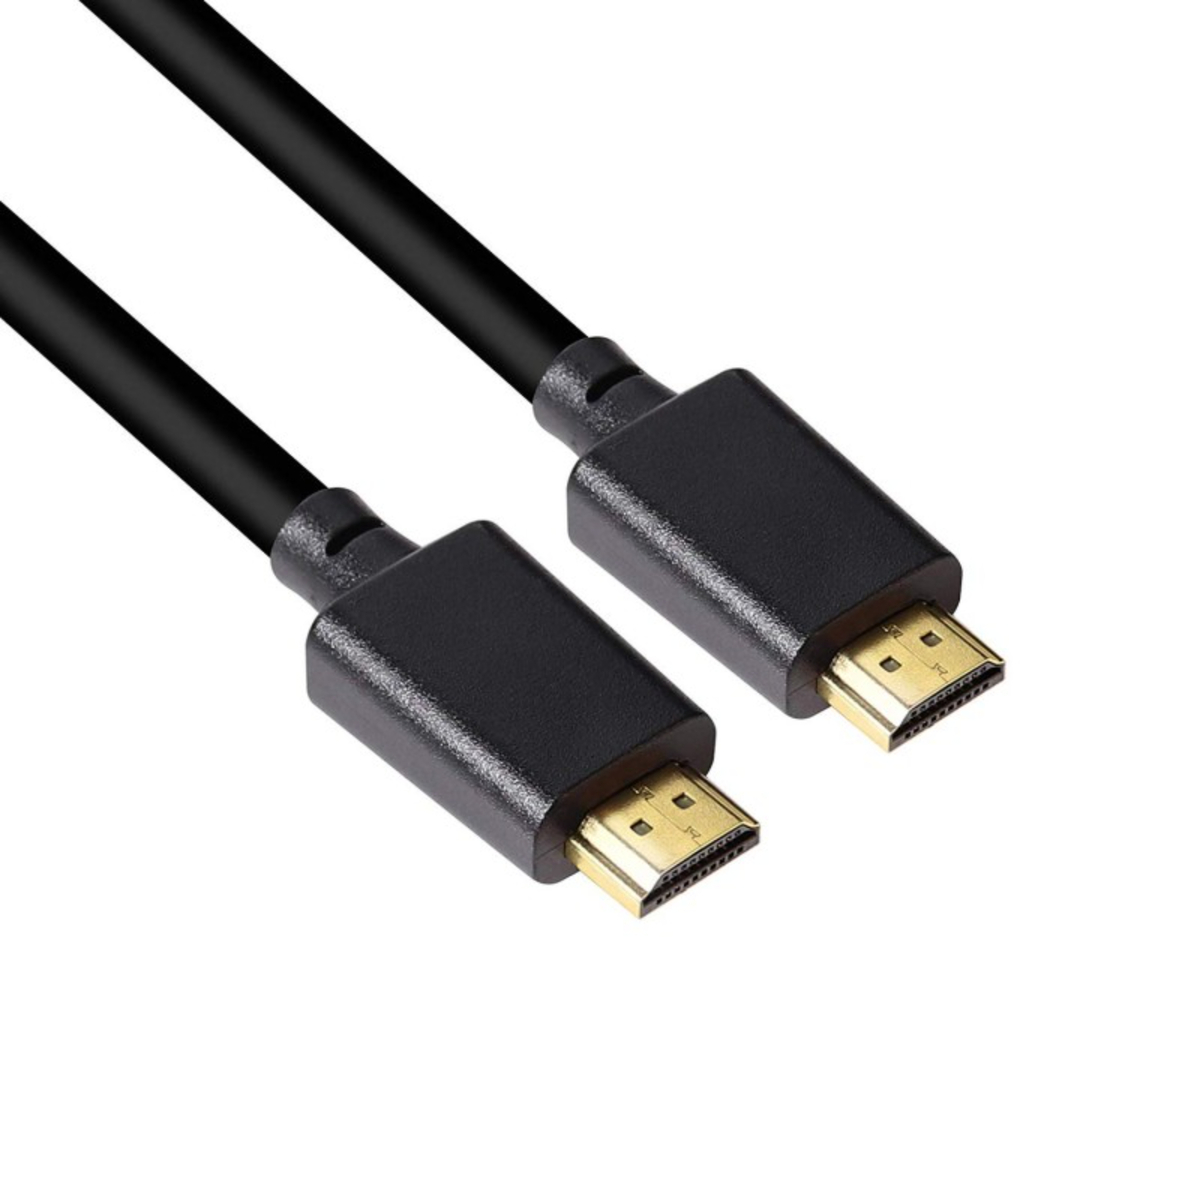 Trands 8K Ultra High Speed HDMI Cable, 2 m, Black, TR-CA256